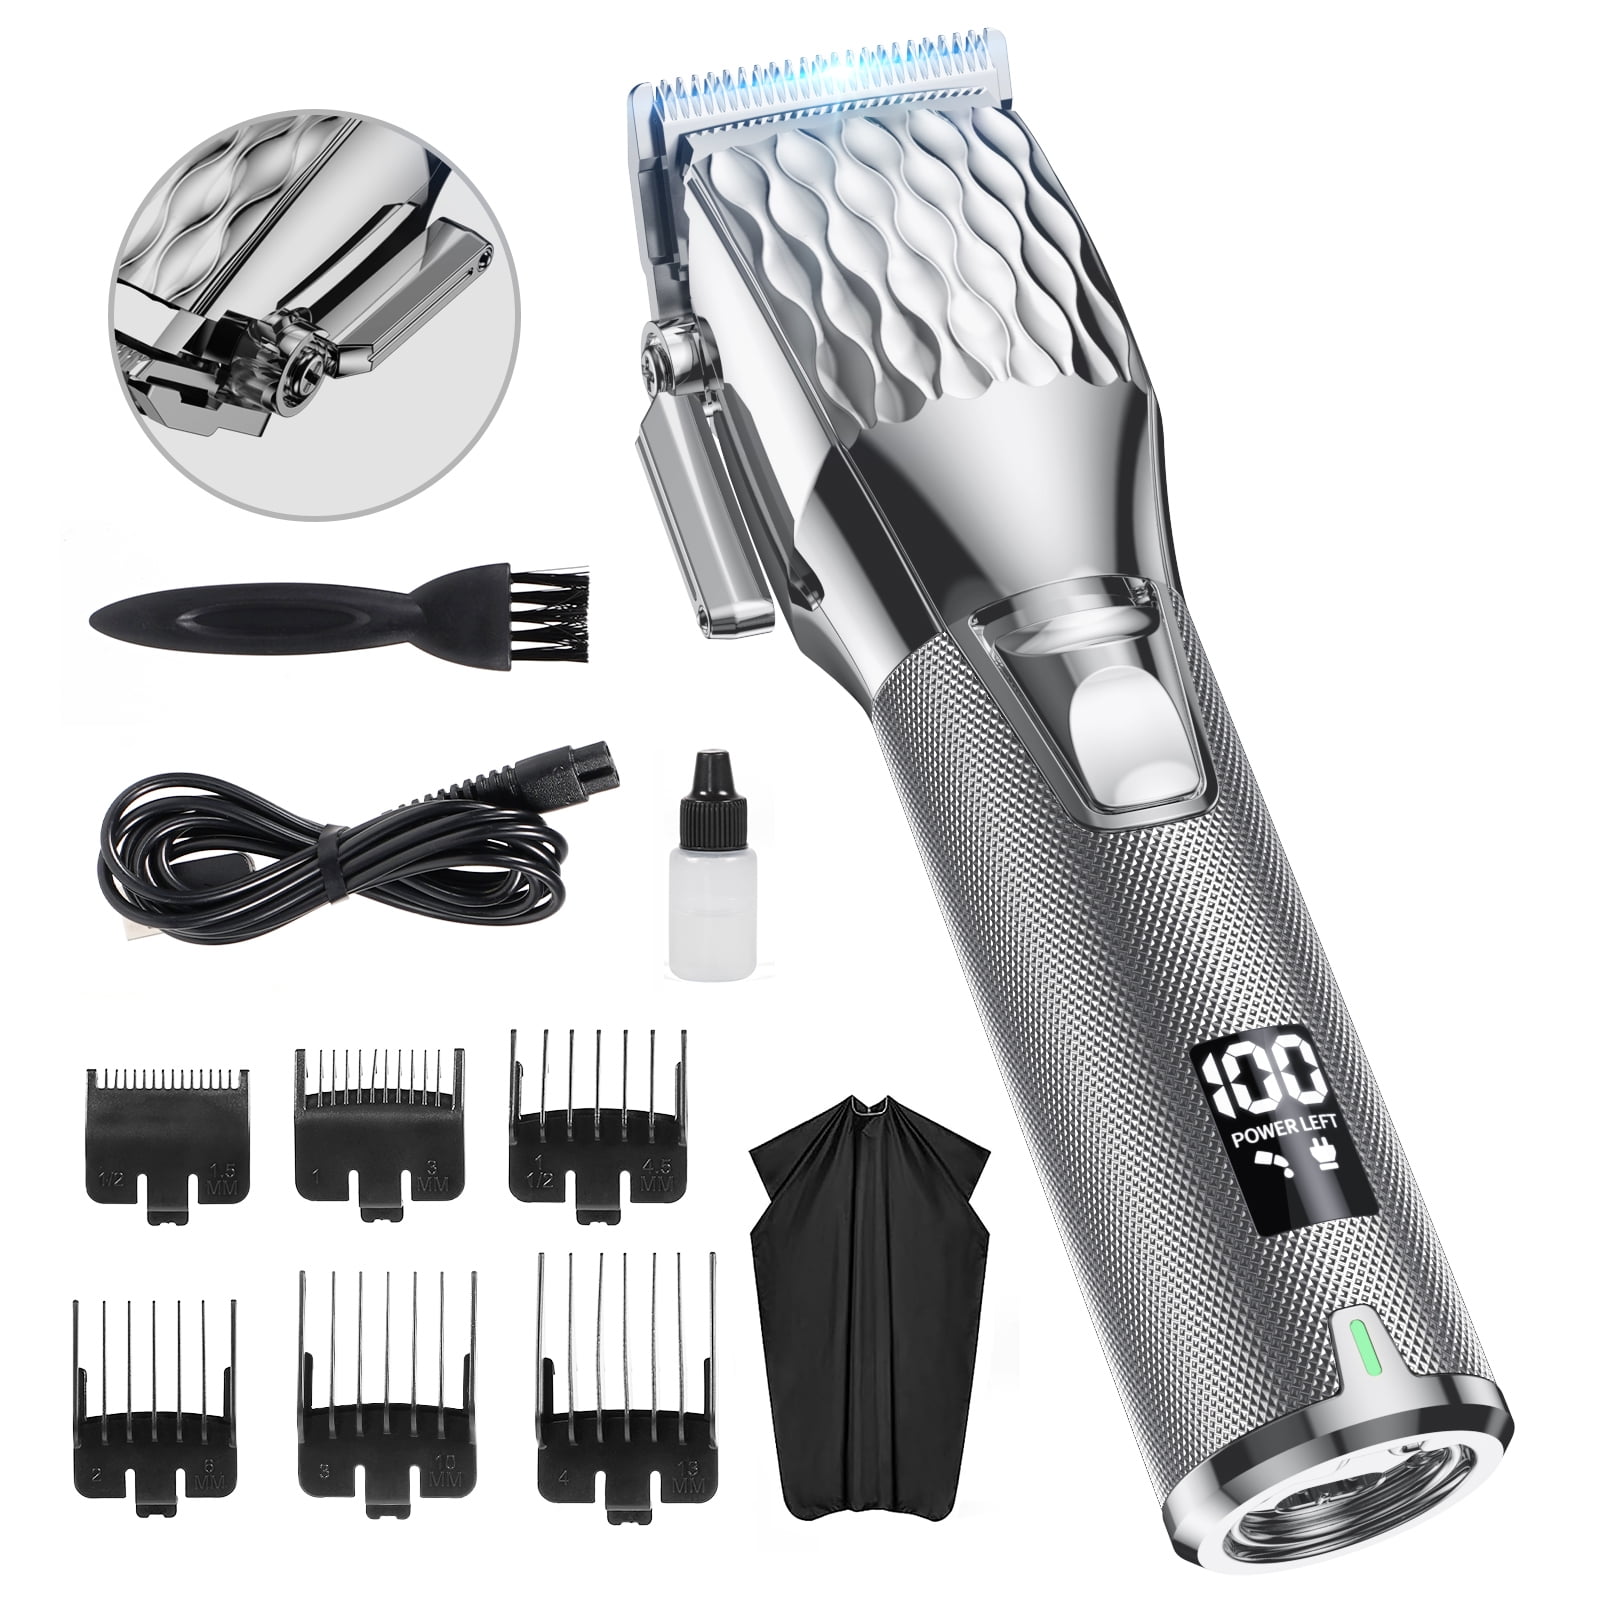 MOSMAOO Professional Cordless Hair Clippers and Hair Trimmer Combo Set for  Barbers&Stylists, Clippers for Hair Cutting &Sharp Blade Beard Trimmer with